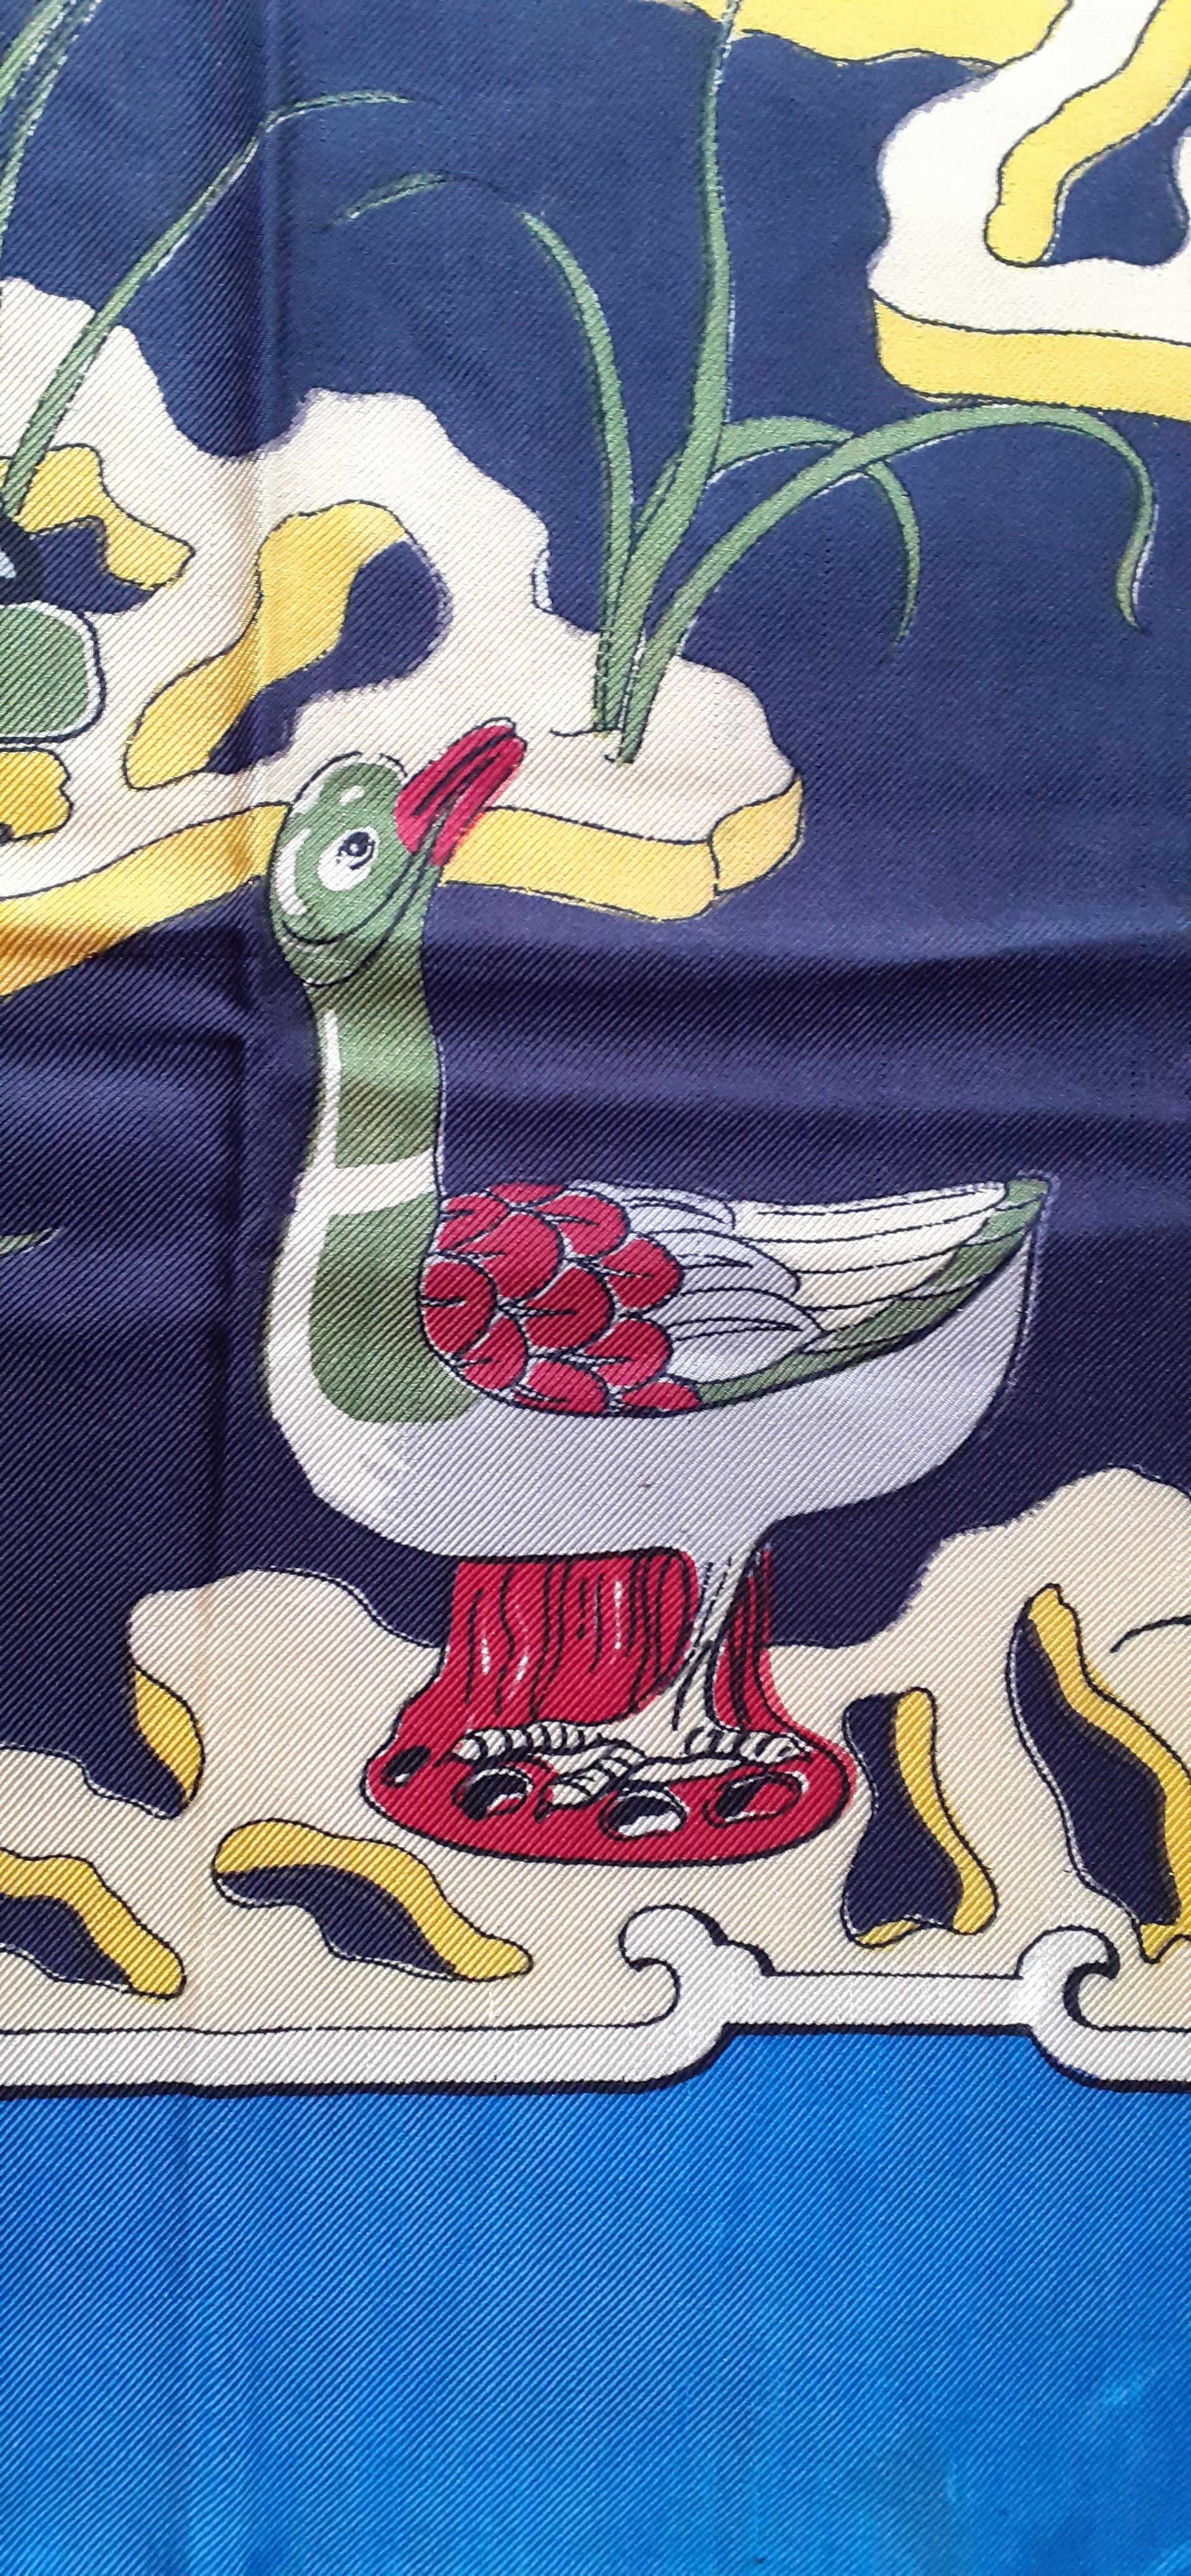 Exceptional Hermès Silk Scarf Faience Chinoise Chinese earthenware Pittner 1940 For Sale 2